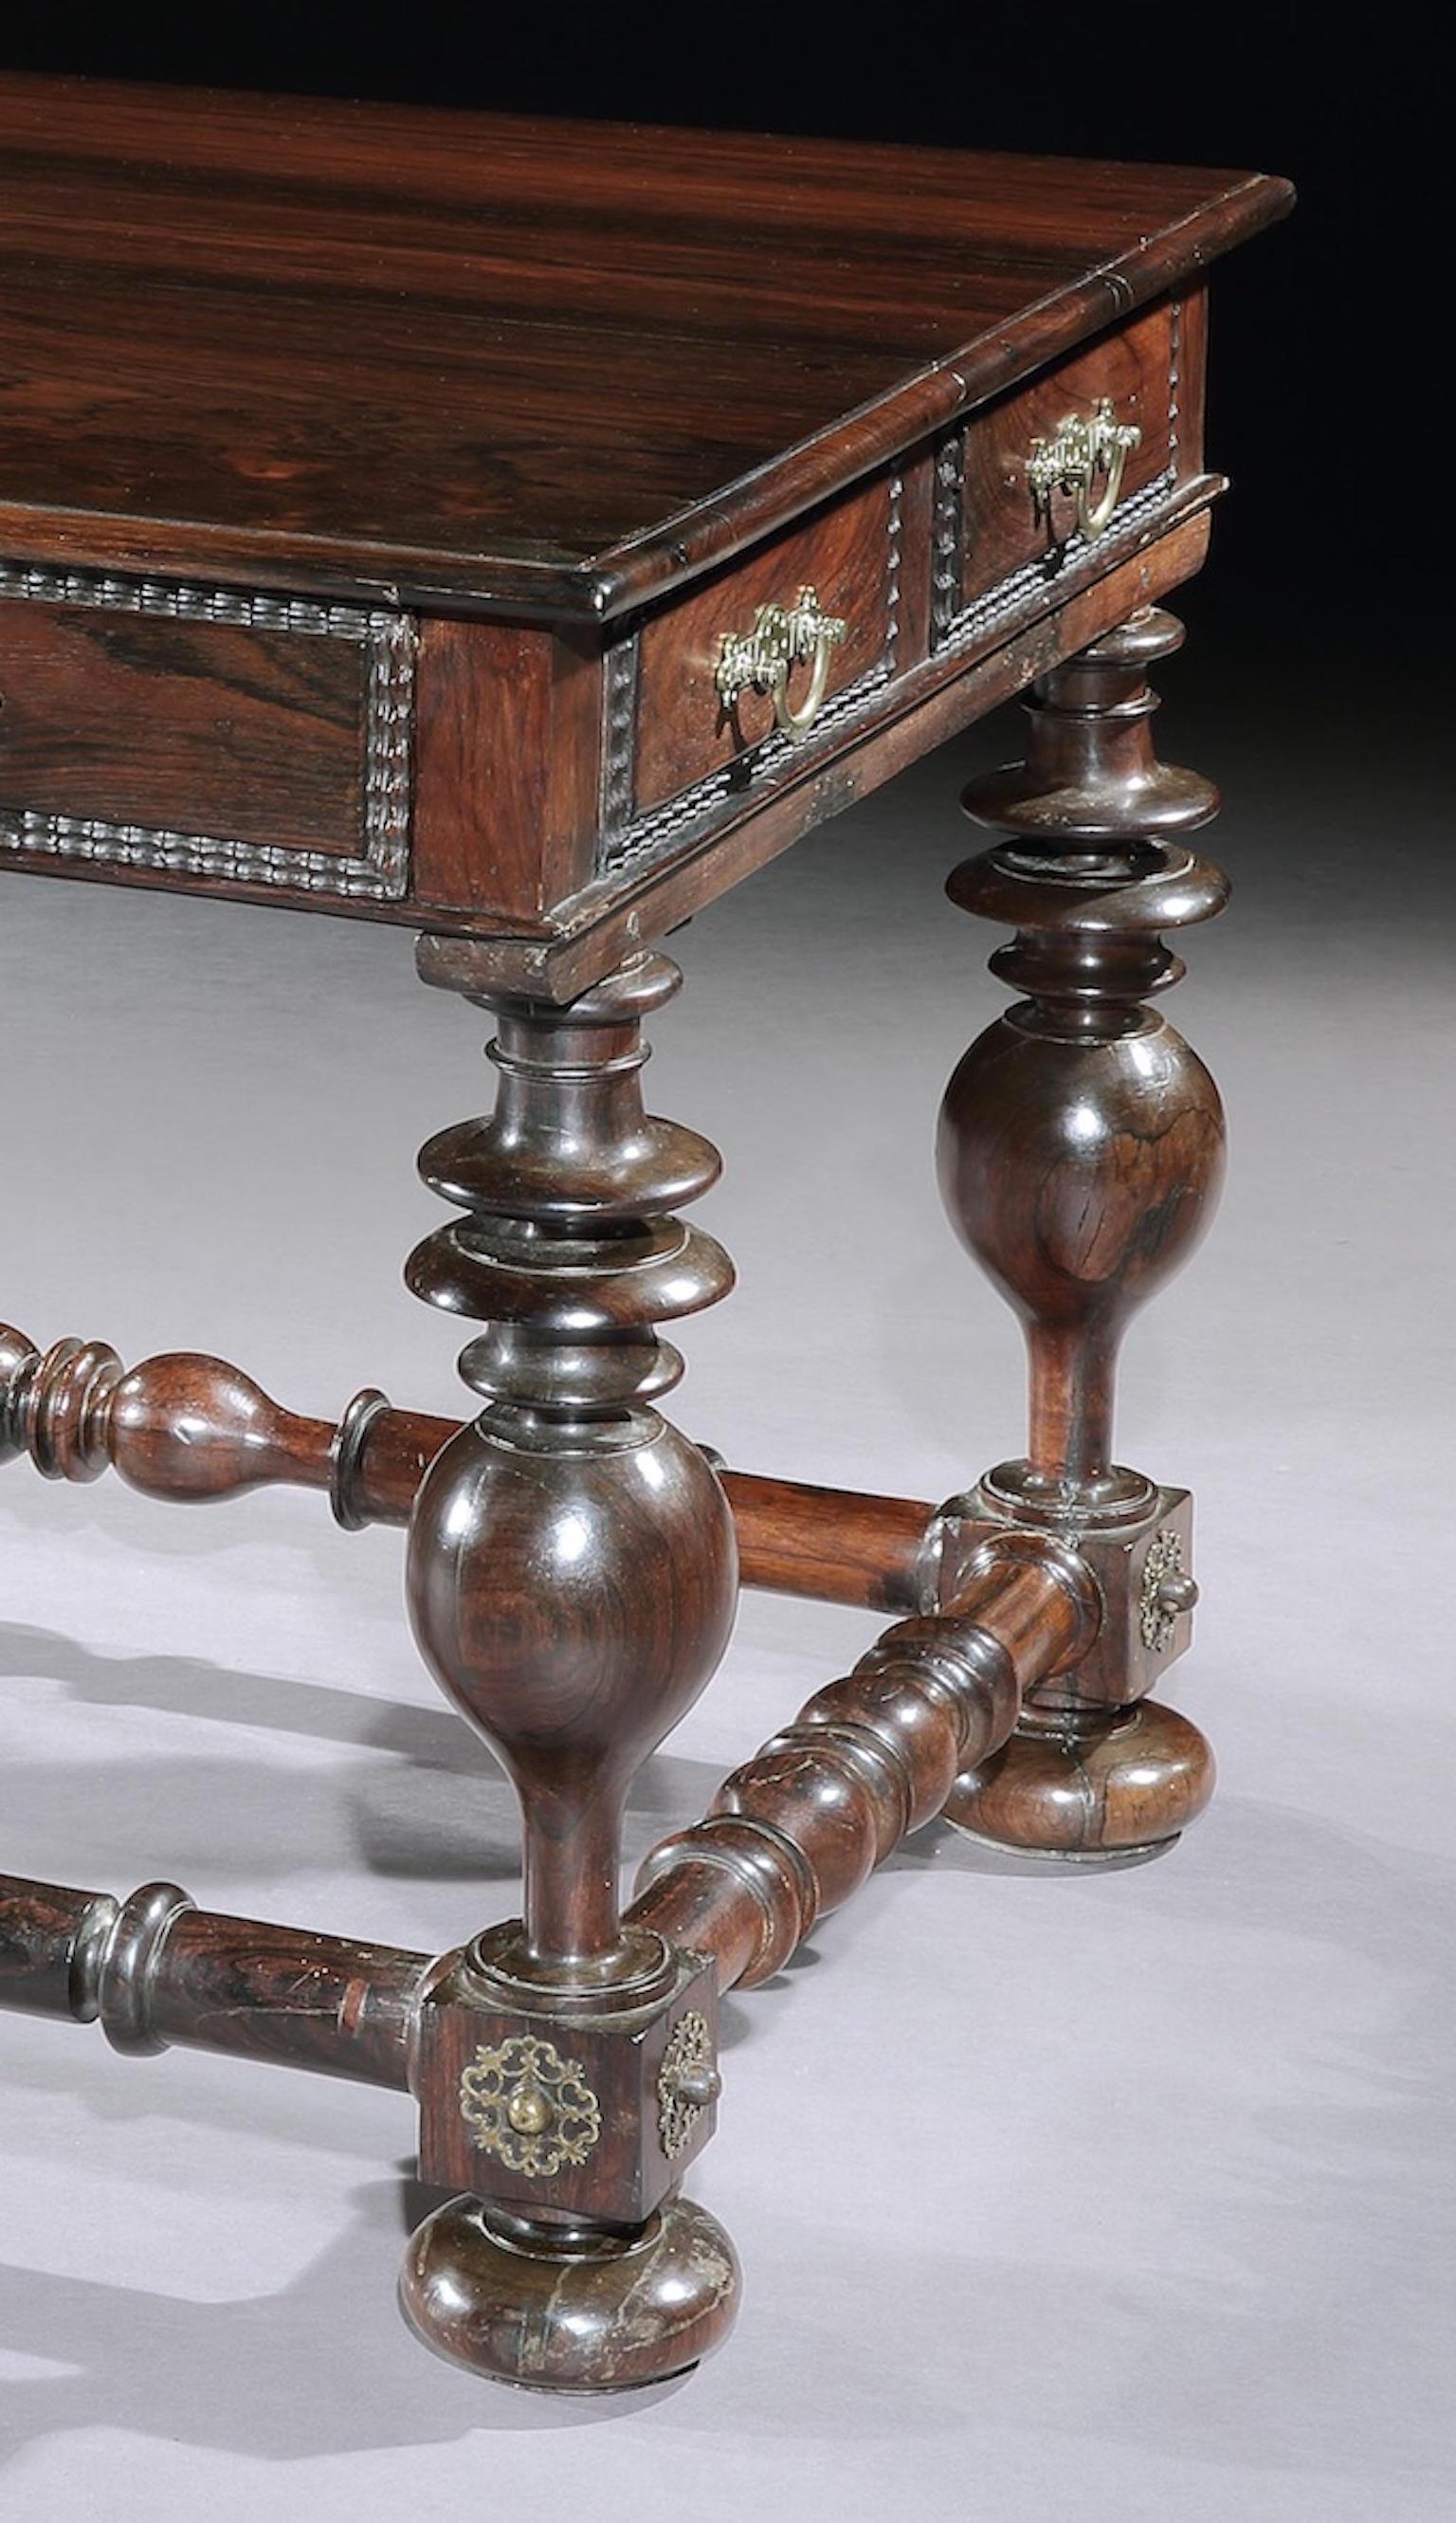 Turned Table, 17th Century Baroque, Portuguese, Brazilian Rosewood